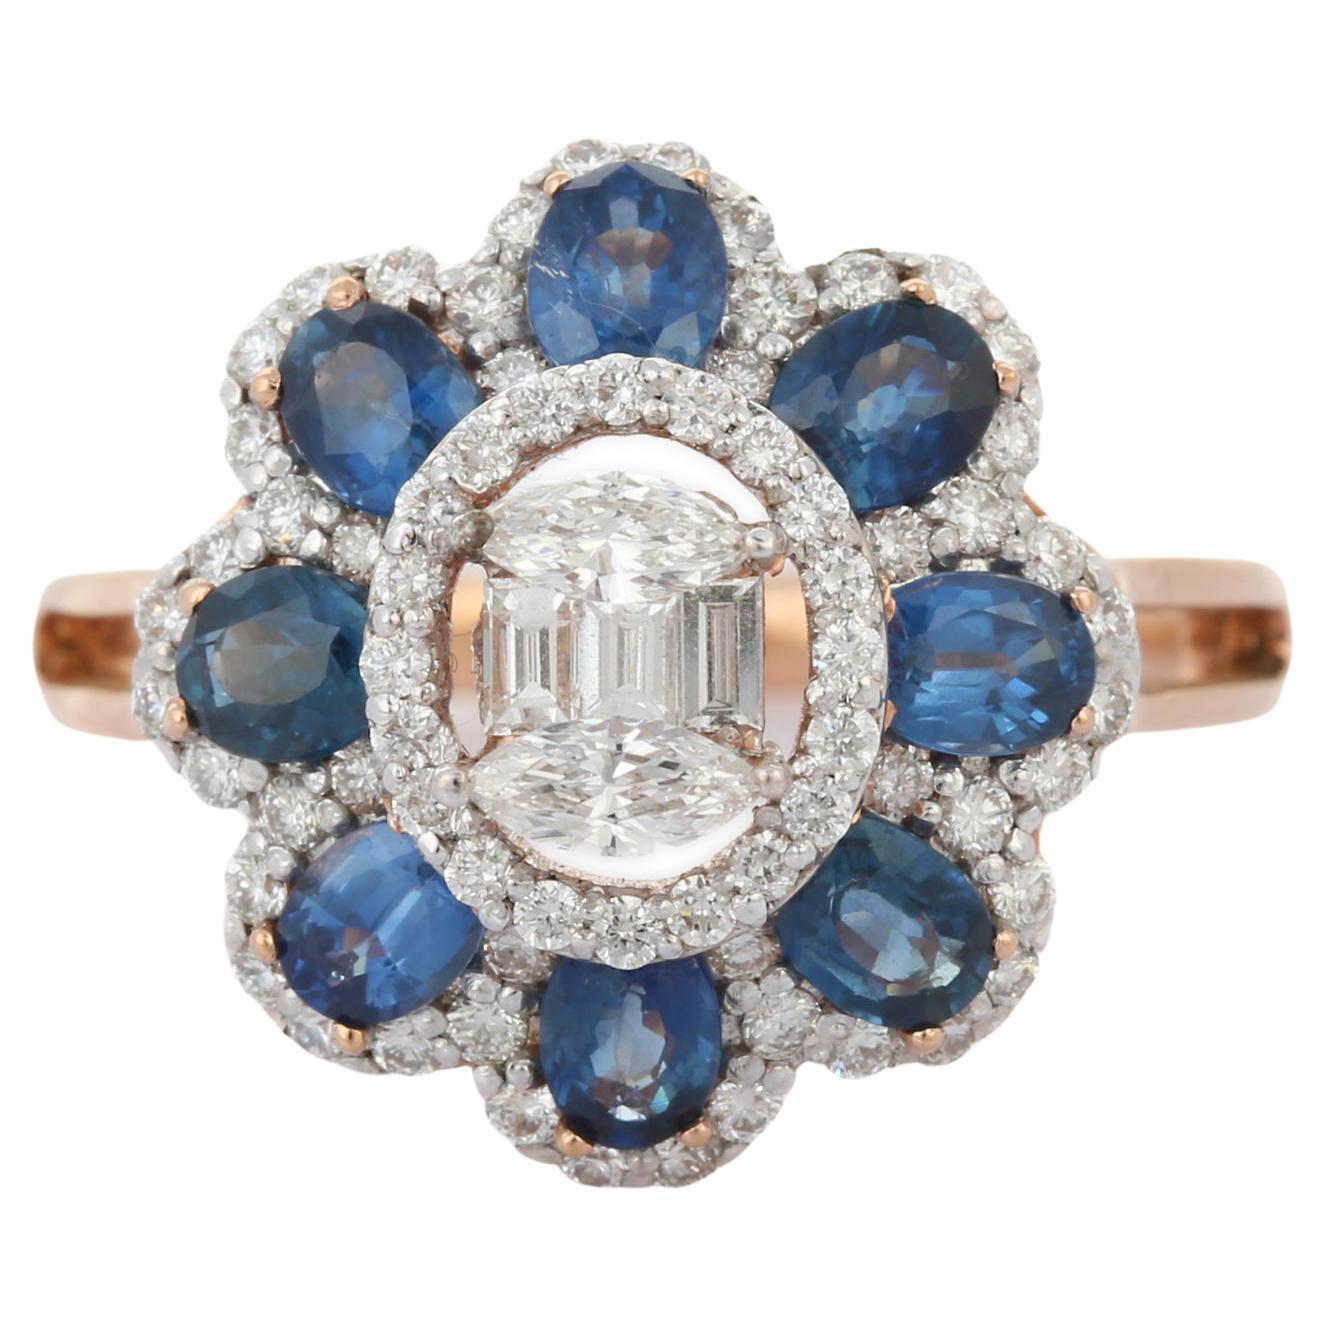 For Sale:  18K Solid Rose Gold 1.76 ct Sapphire Diamond Big Flower Wedding Ring